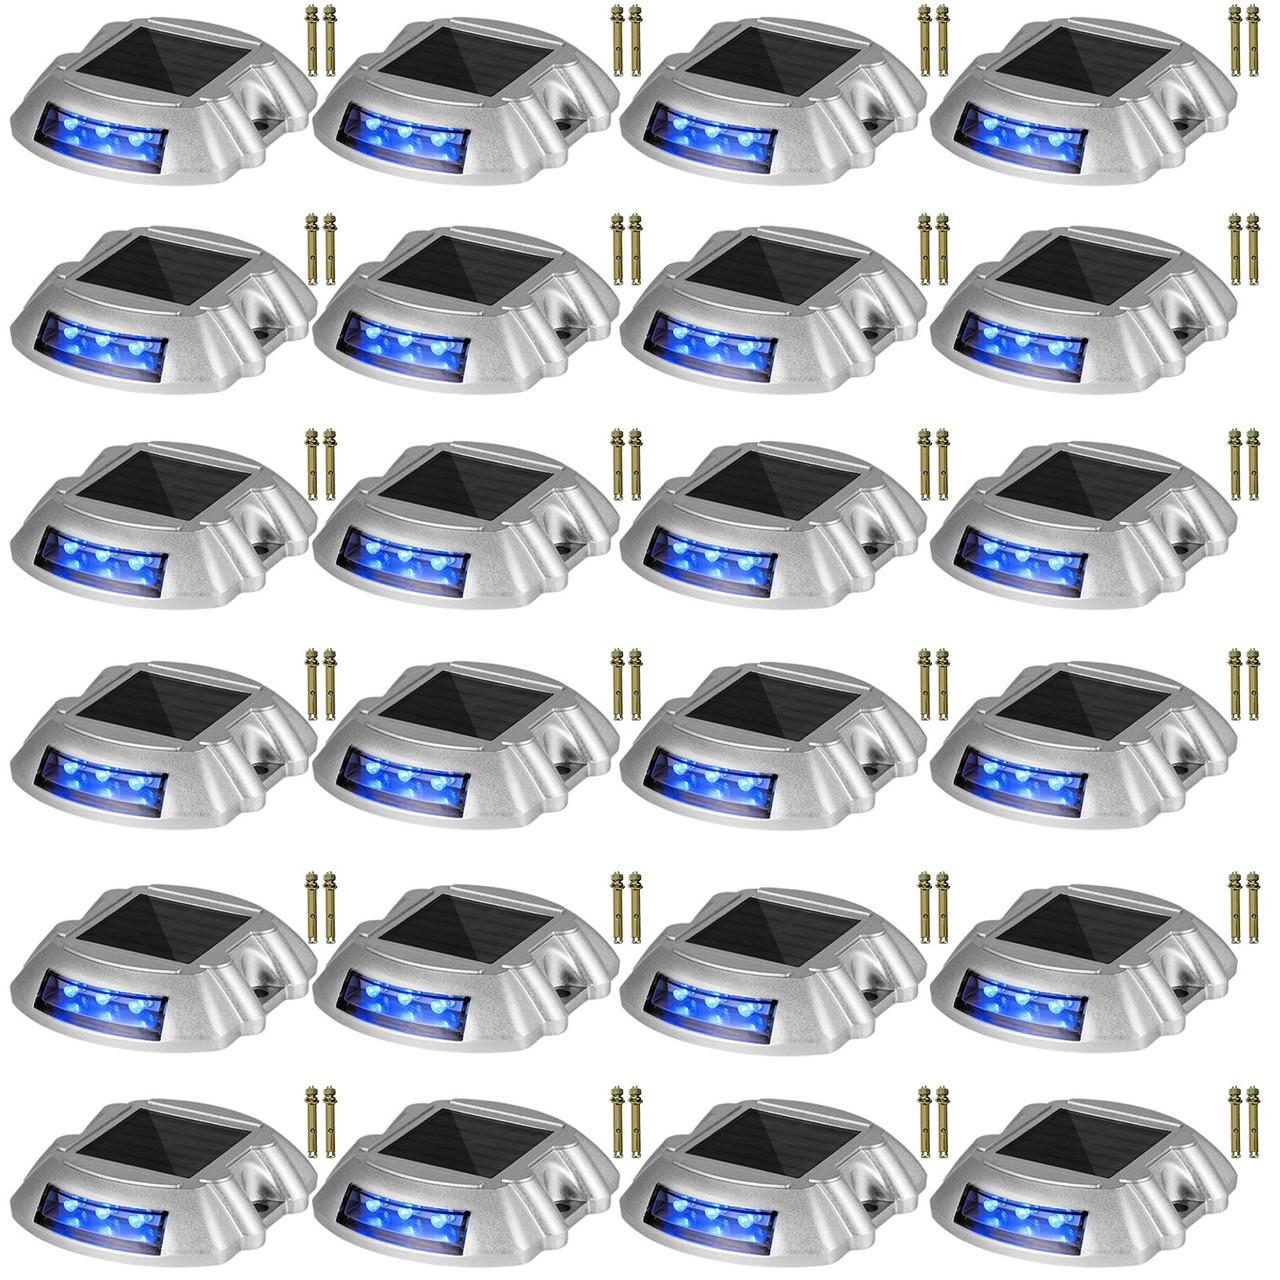 Driveway Lights 24-Pack, Solar Driveway Lights with Switch Button, Solar Deck Lights Waterproof, Wireless Dock Lights 6 LEDs for Path Warning Garden Walkway Sidewalk Steps, LED Bright Blue